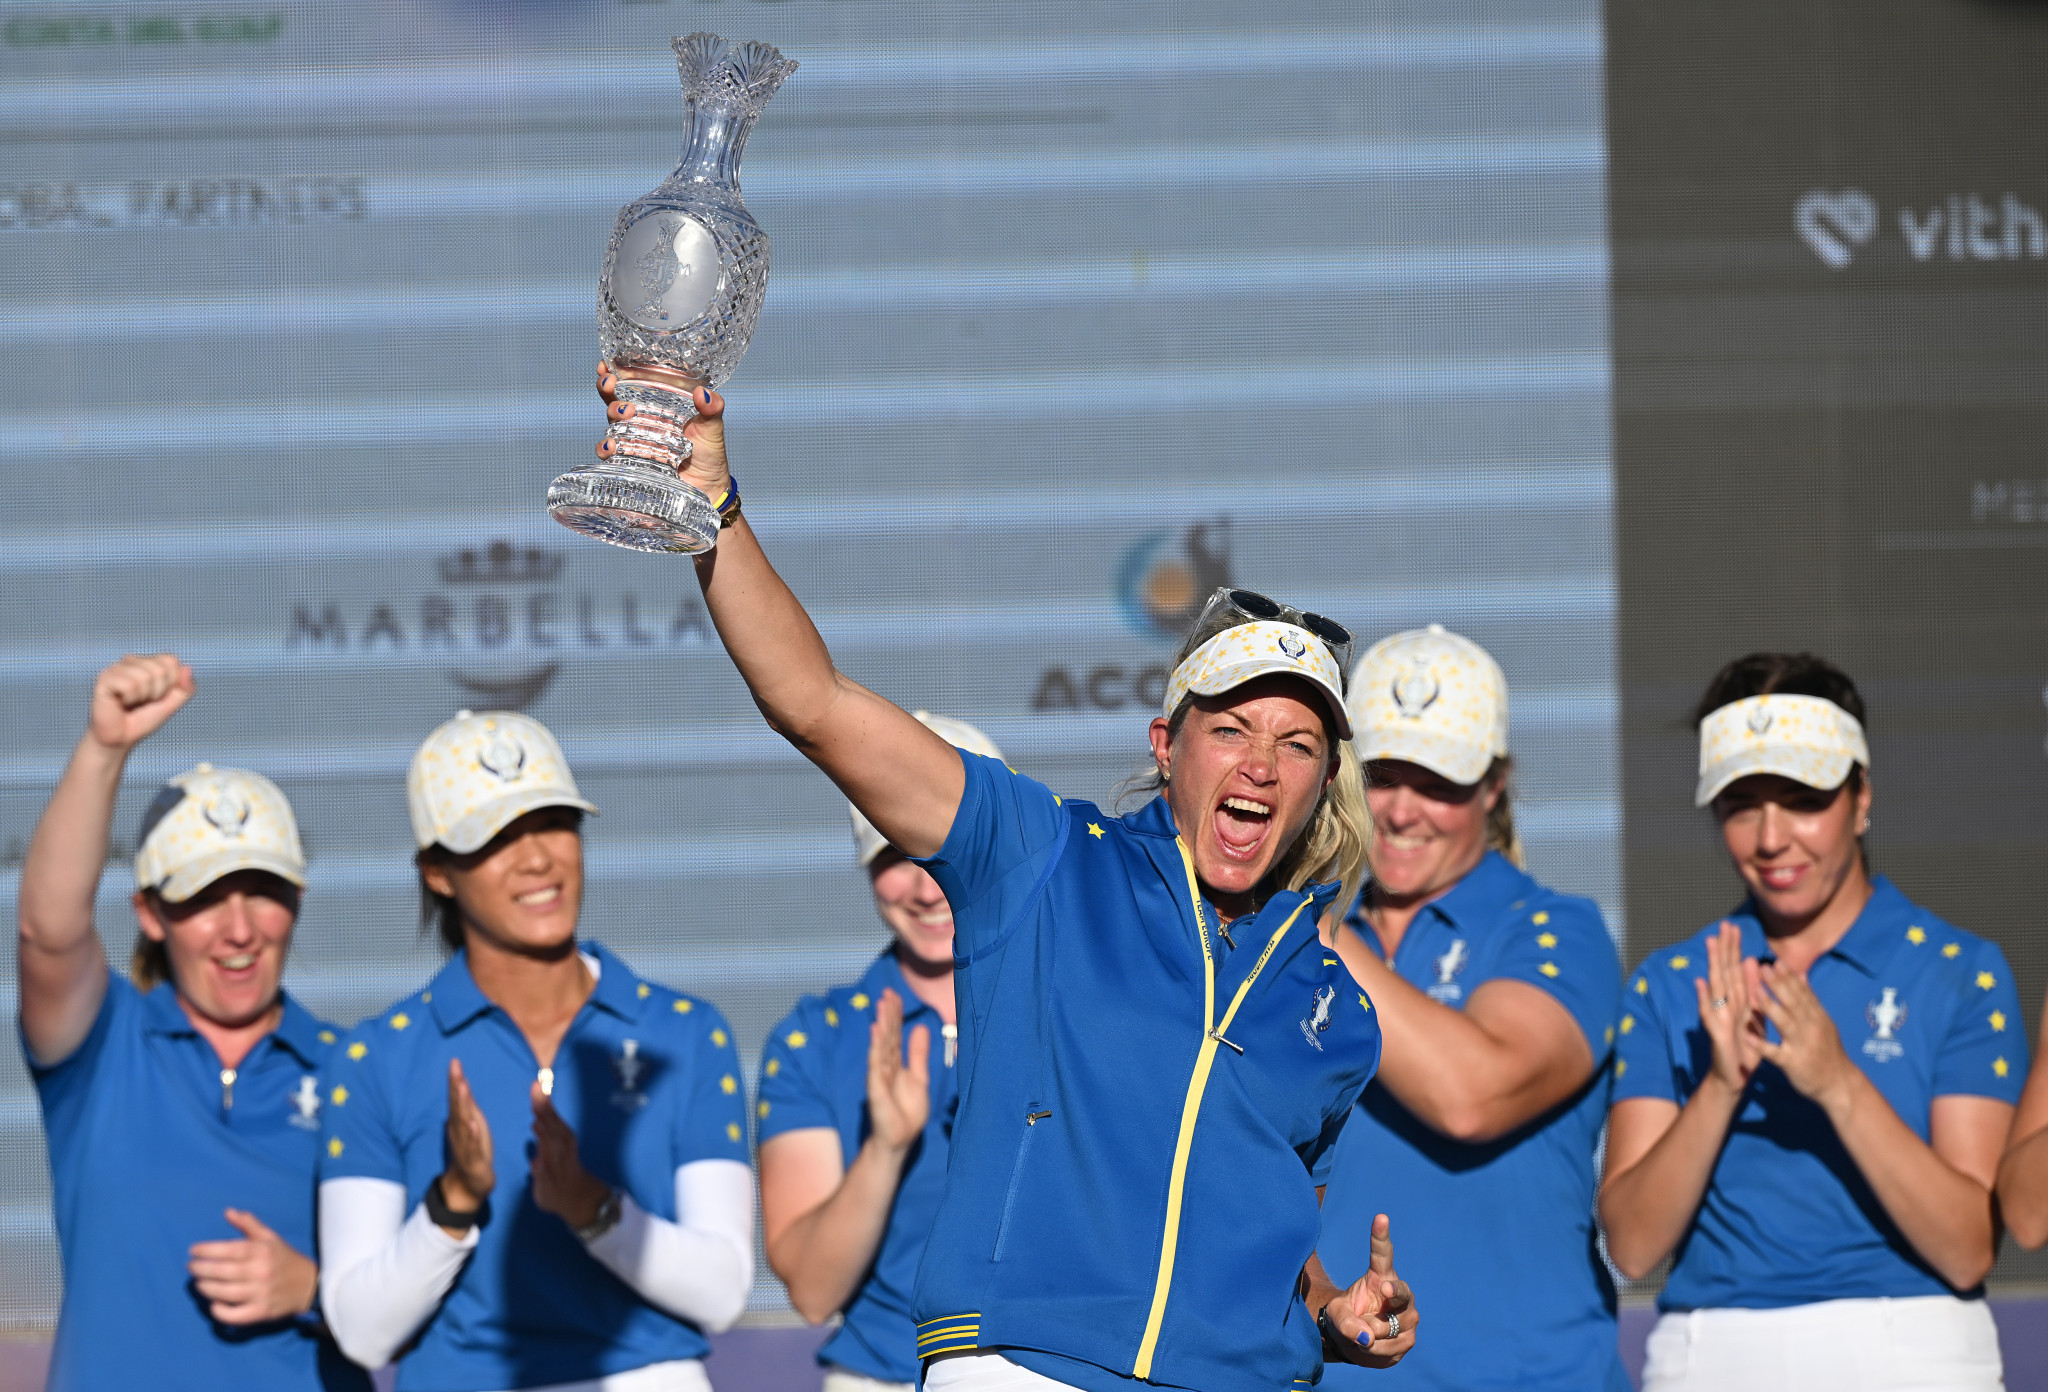 Europe celebrate retaining the Solheim Cup, as the contest ended drawn for the first time in the event's history ©Getty Images